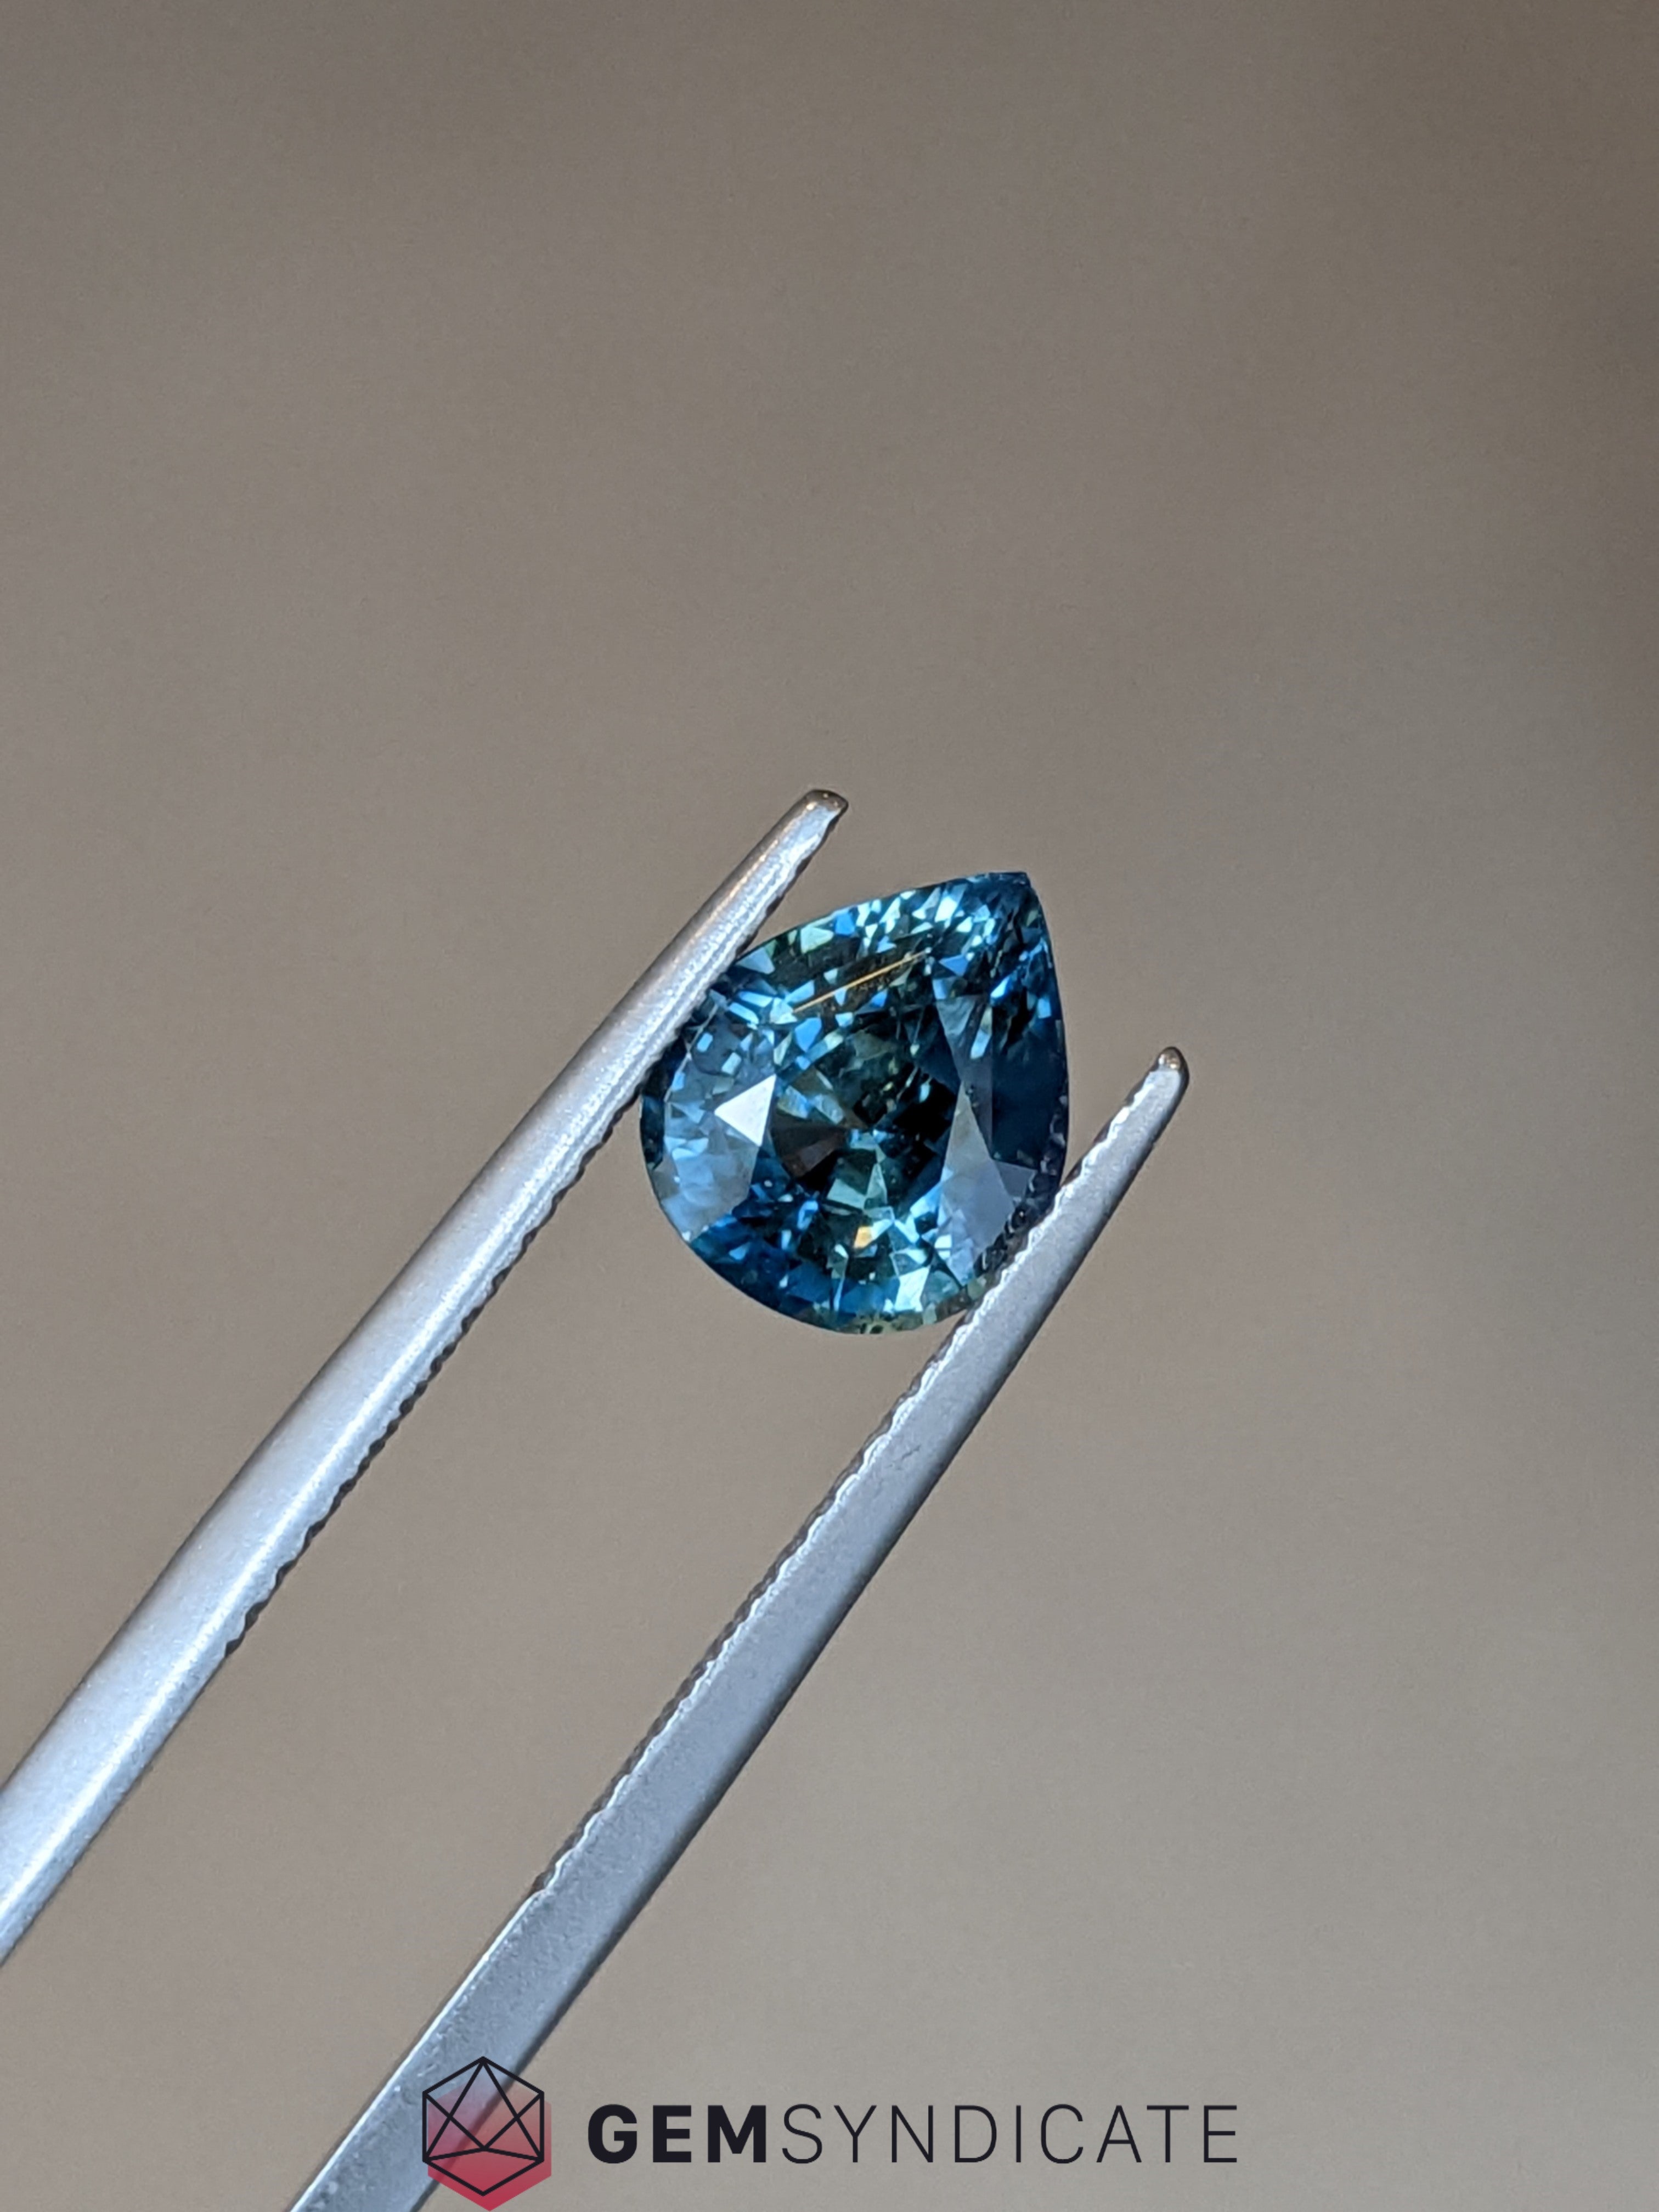 Amazing Pear Shape Teal Sapphire 2.89ct